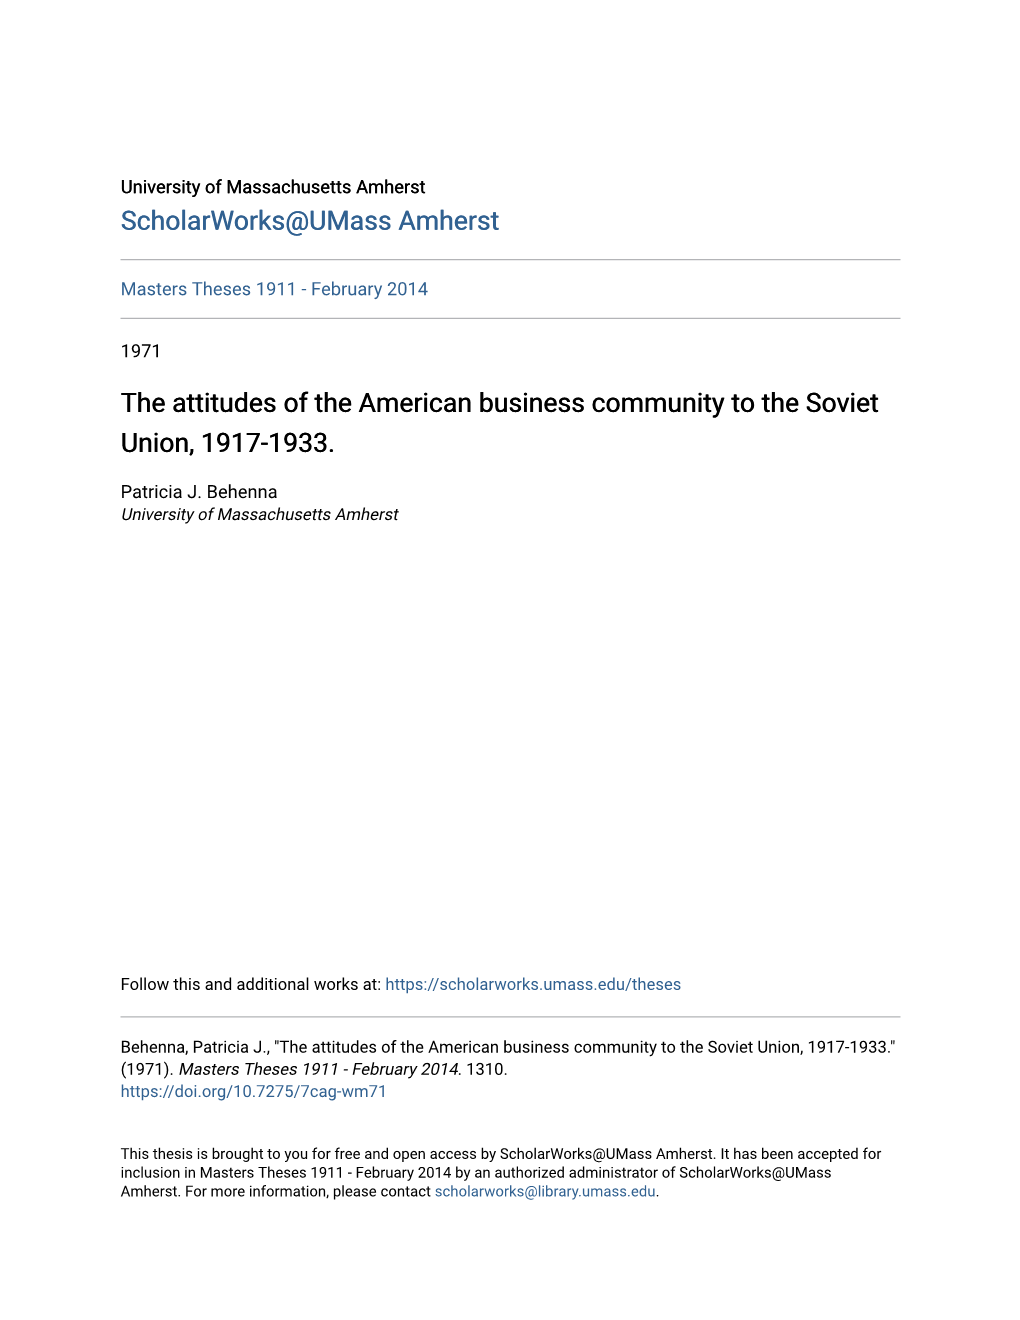 The Attitudes of the American Business Community to the Soviet Union, 1917-1933